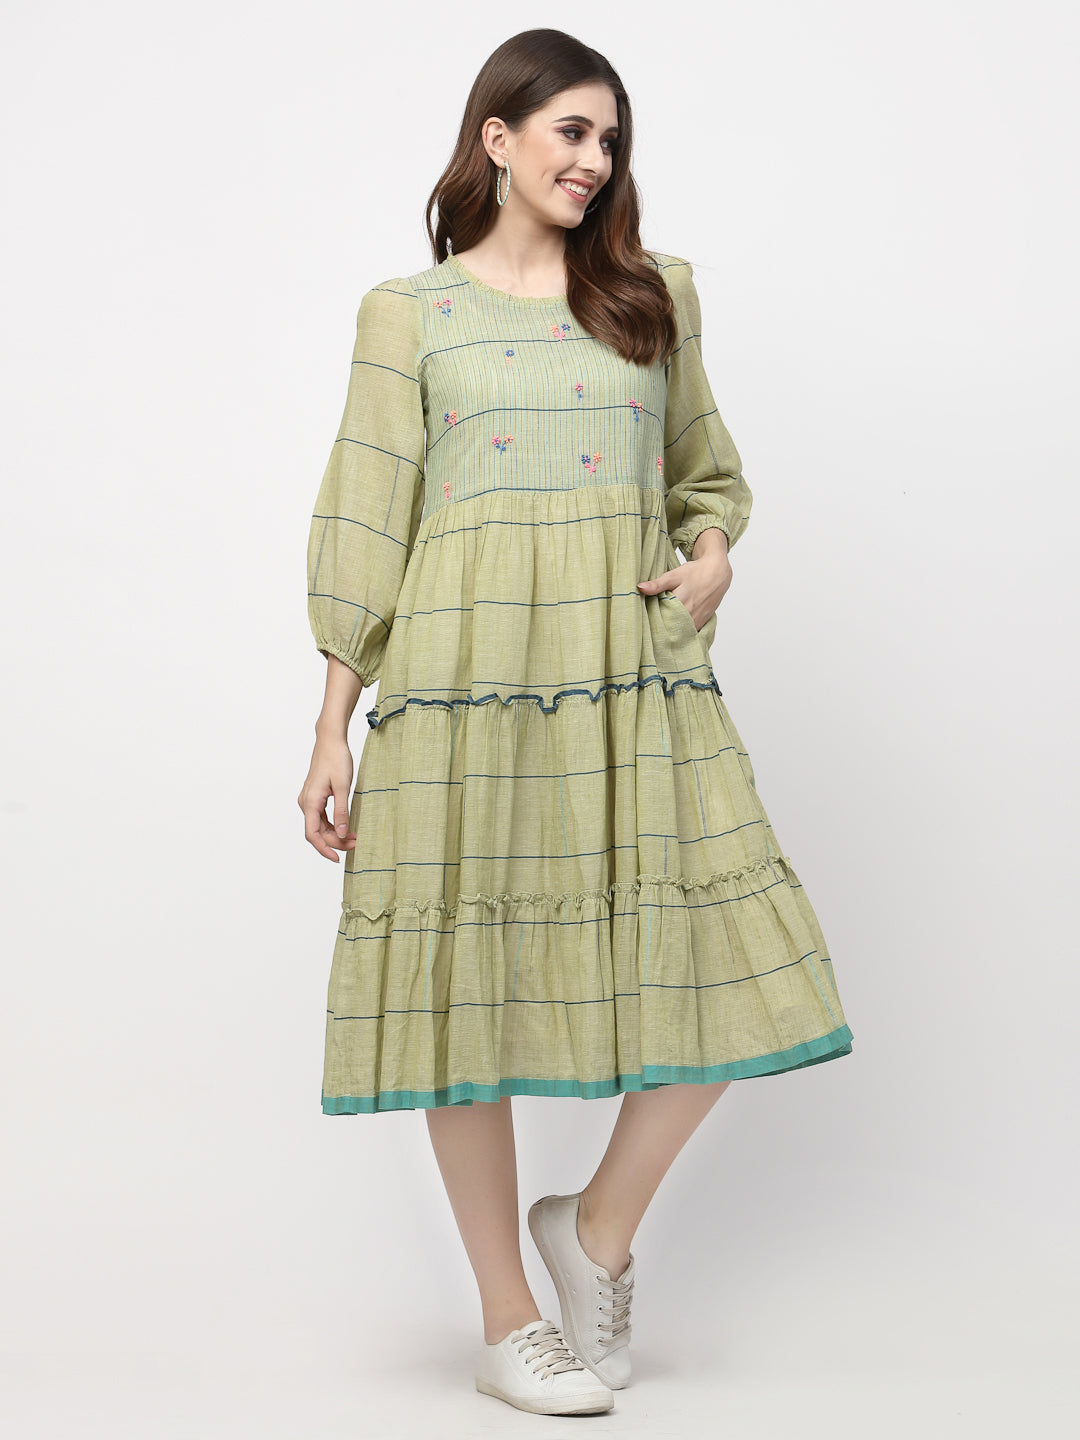 Terquois Green Stripes Woven A-line Dress with Gathers detail and has a Round-neck Dresses TERQUOIS   